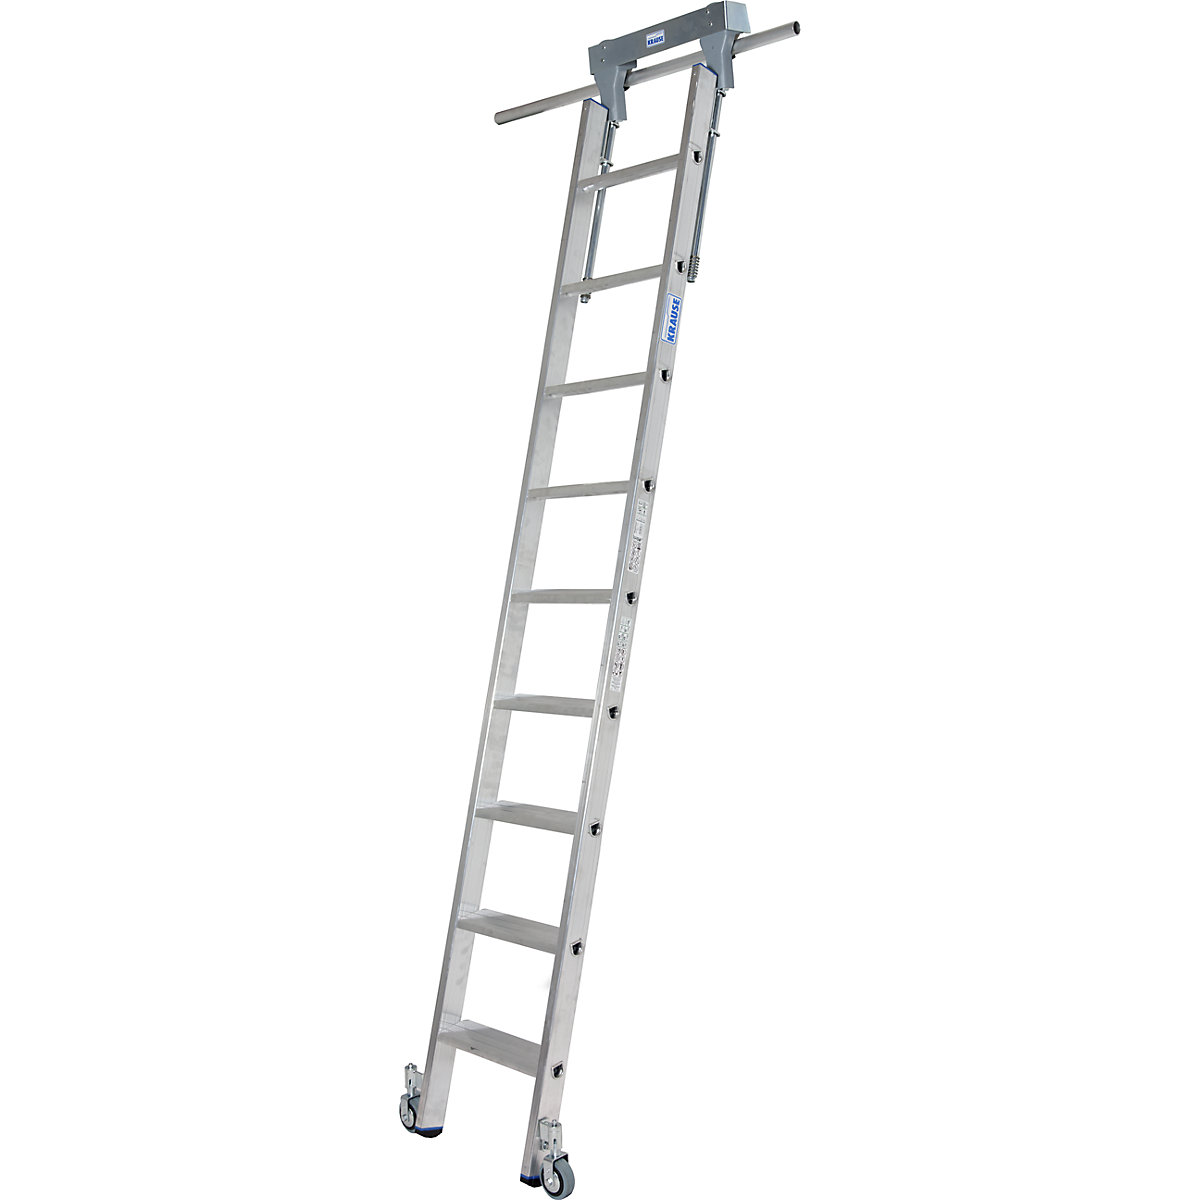 KRAUSE – Step shelf ladder, with wheels on top for round tubing rail system, 9 steps